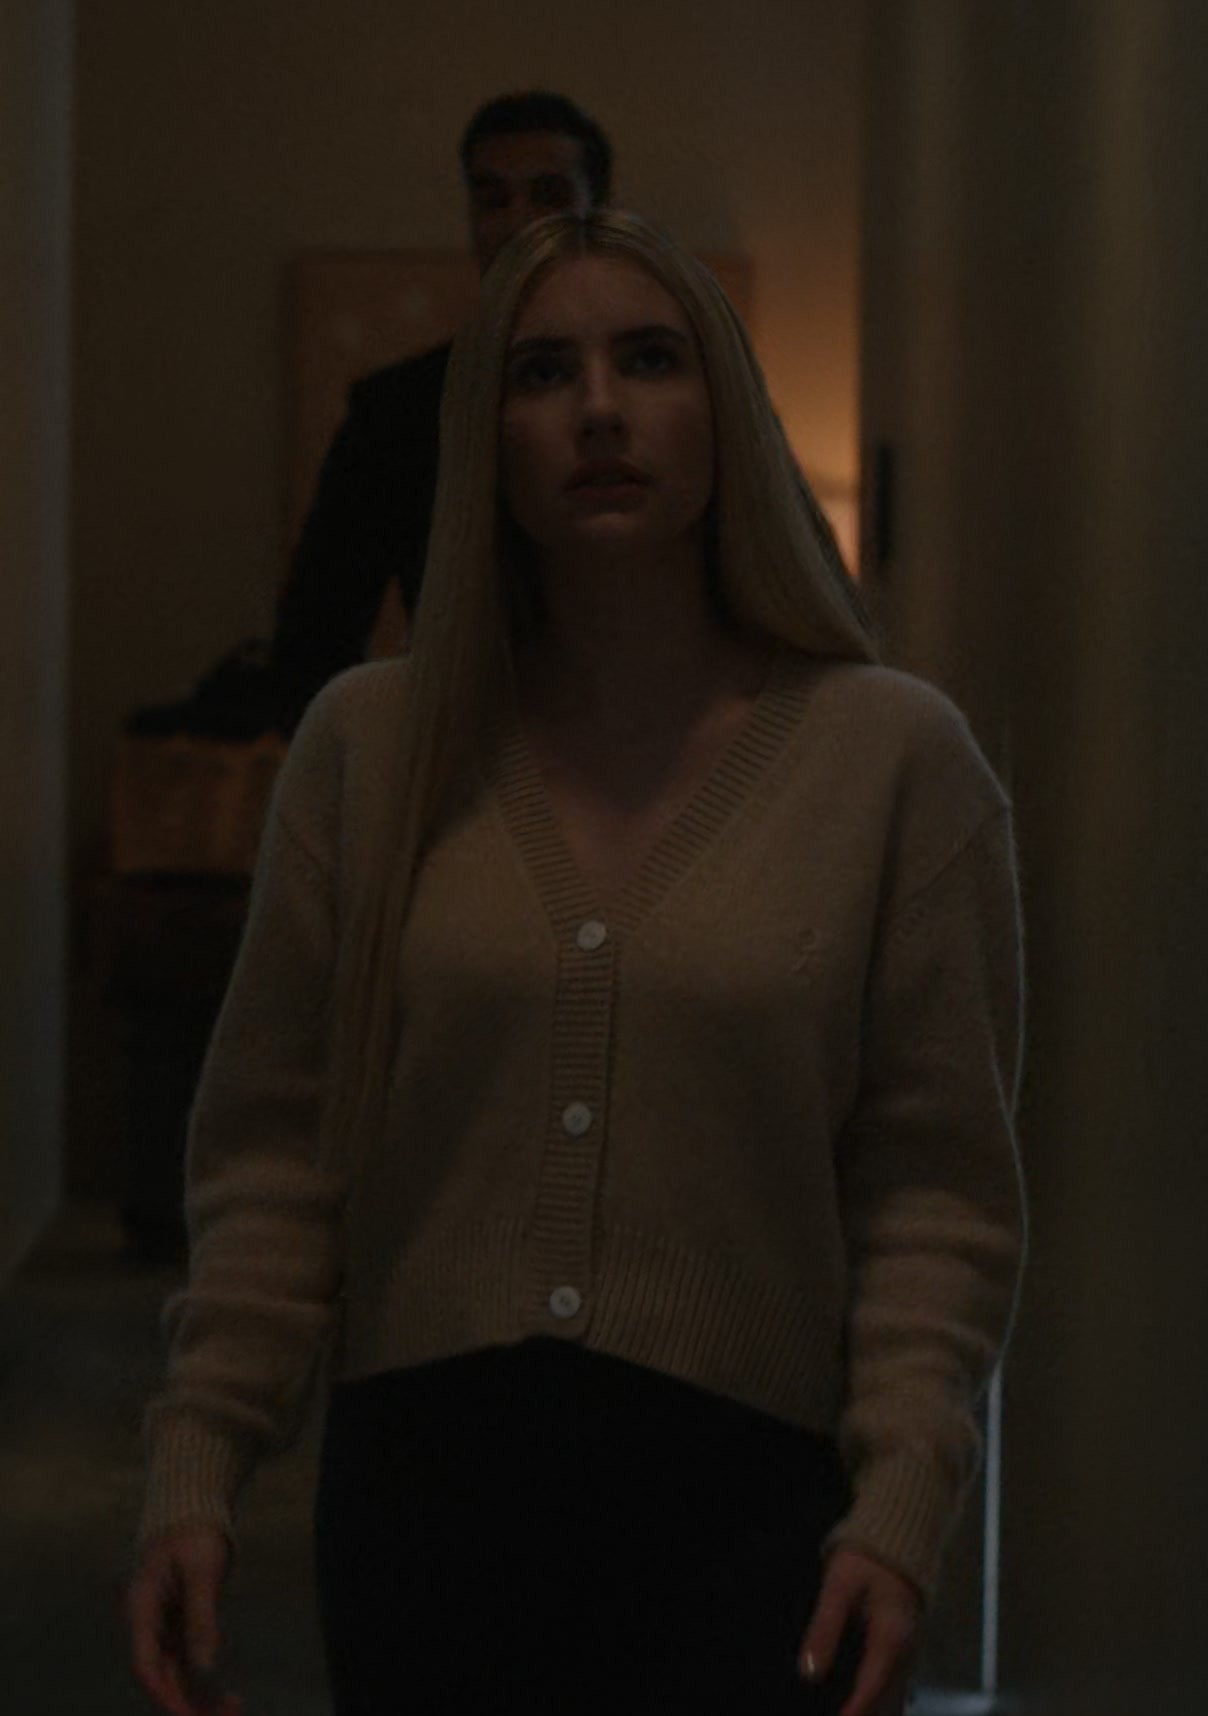 Worn on American Horror Story TV Show - Beige V-Neck Button-Up Cardigan of Emma Roberts as Anna Victoria Alcott